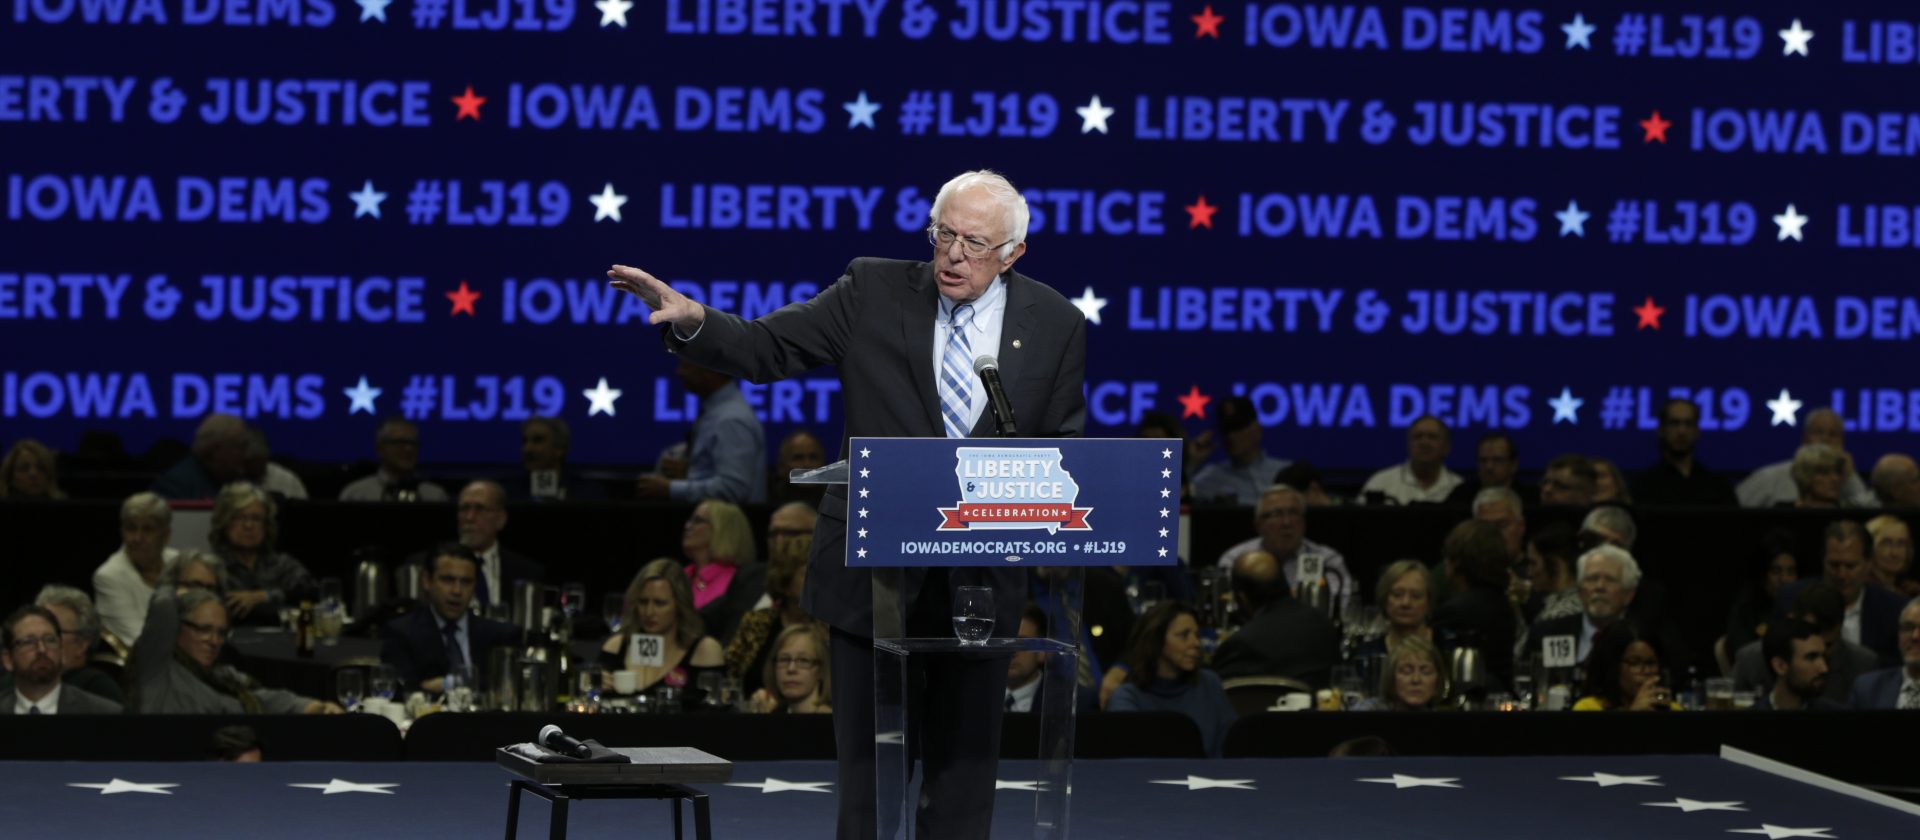 Democratic presidential candidate Sen. Bernie Sanders speaks during the Iowa Democratic Party's Liberty and Justice Celebration, Friday, Nov. 1, 2019, in Des Moines, Iowa.